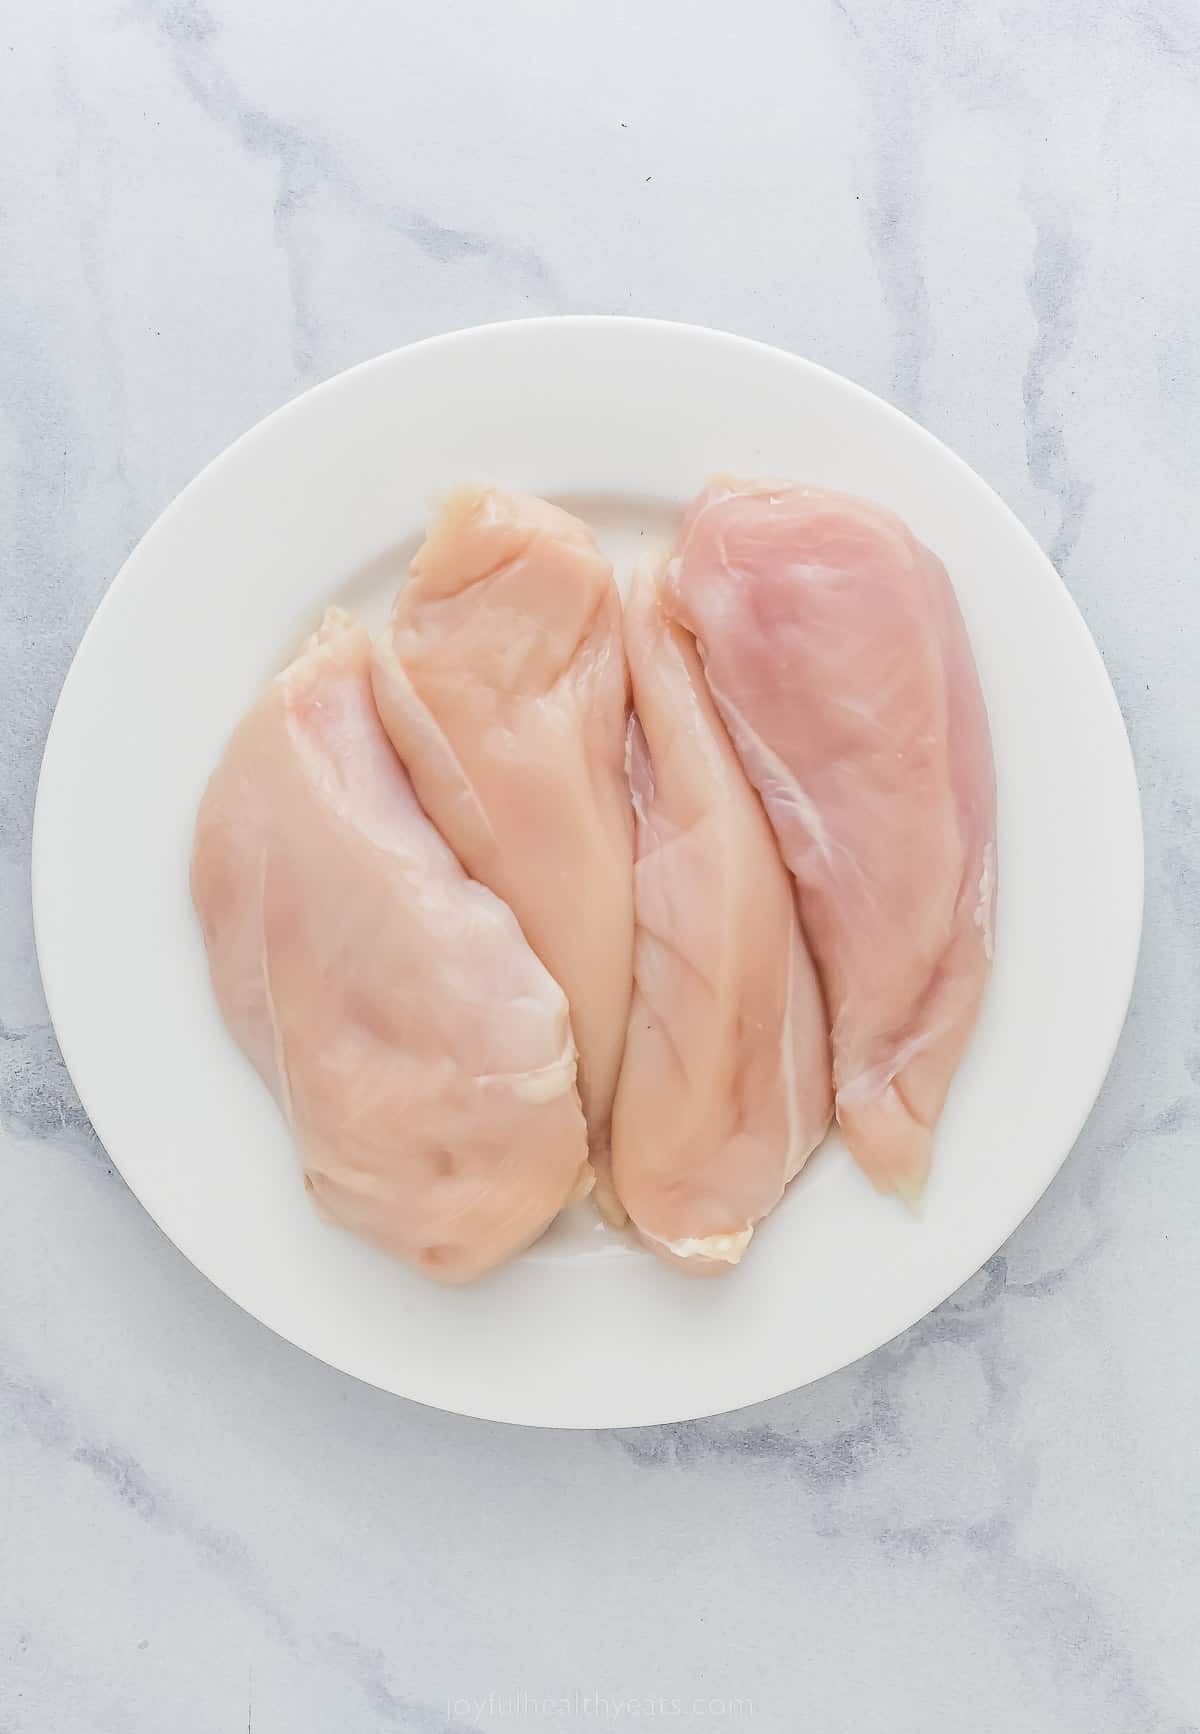 four raw chicken breasts